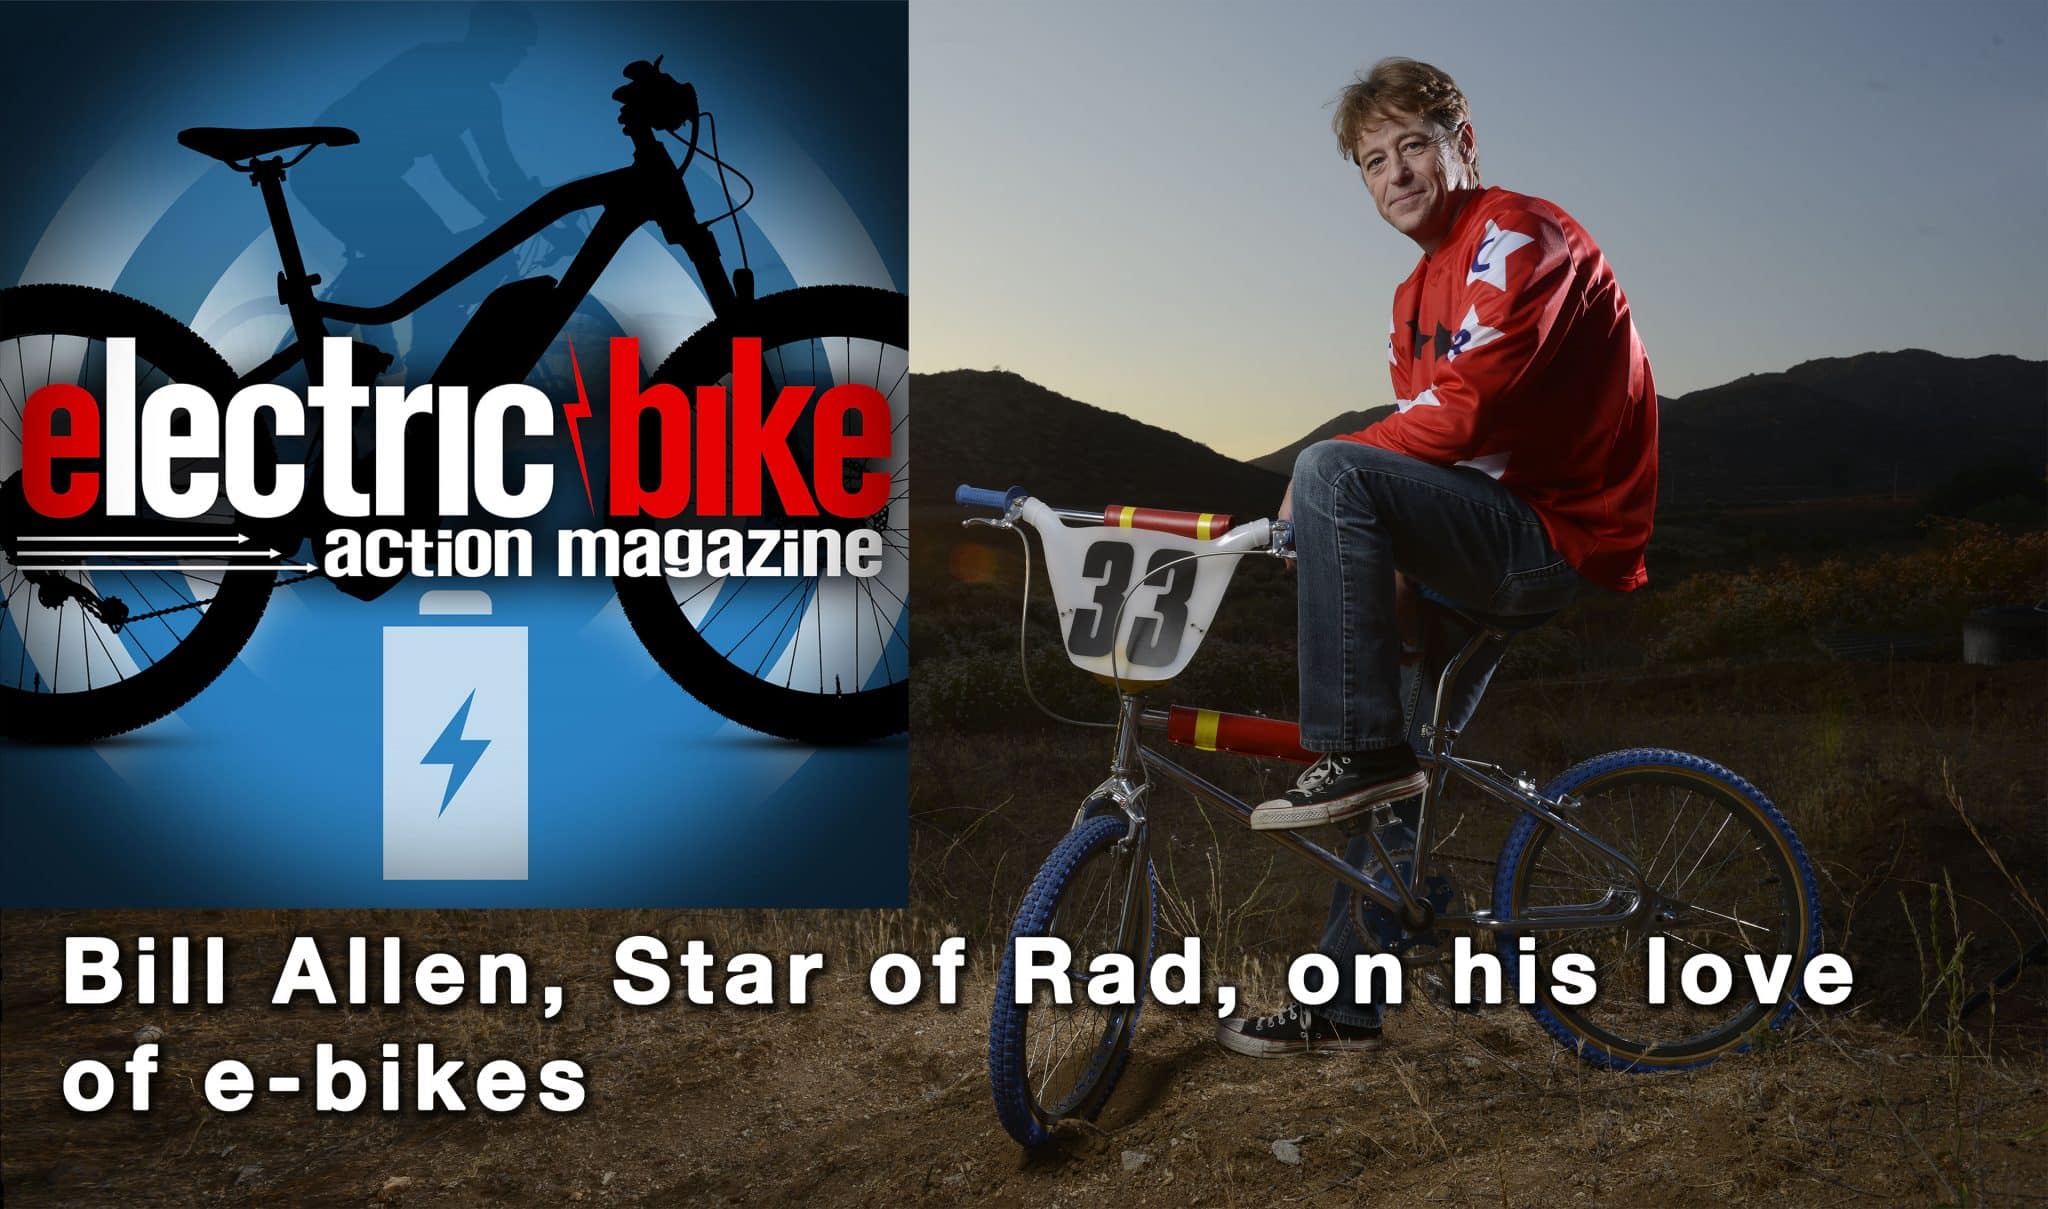 Bill Allen, Cru Jones from Rad, talks about his love of e-bikes and the fans